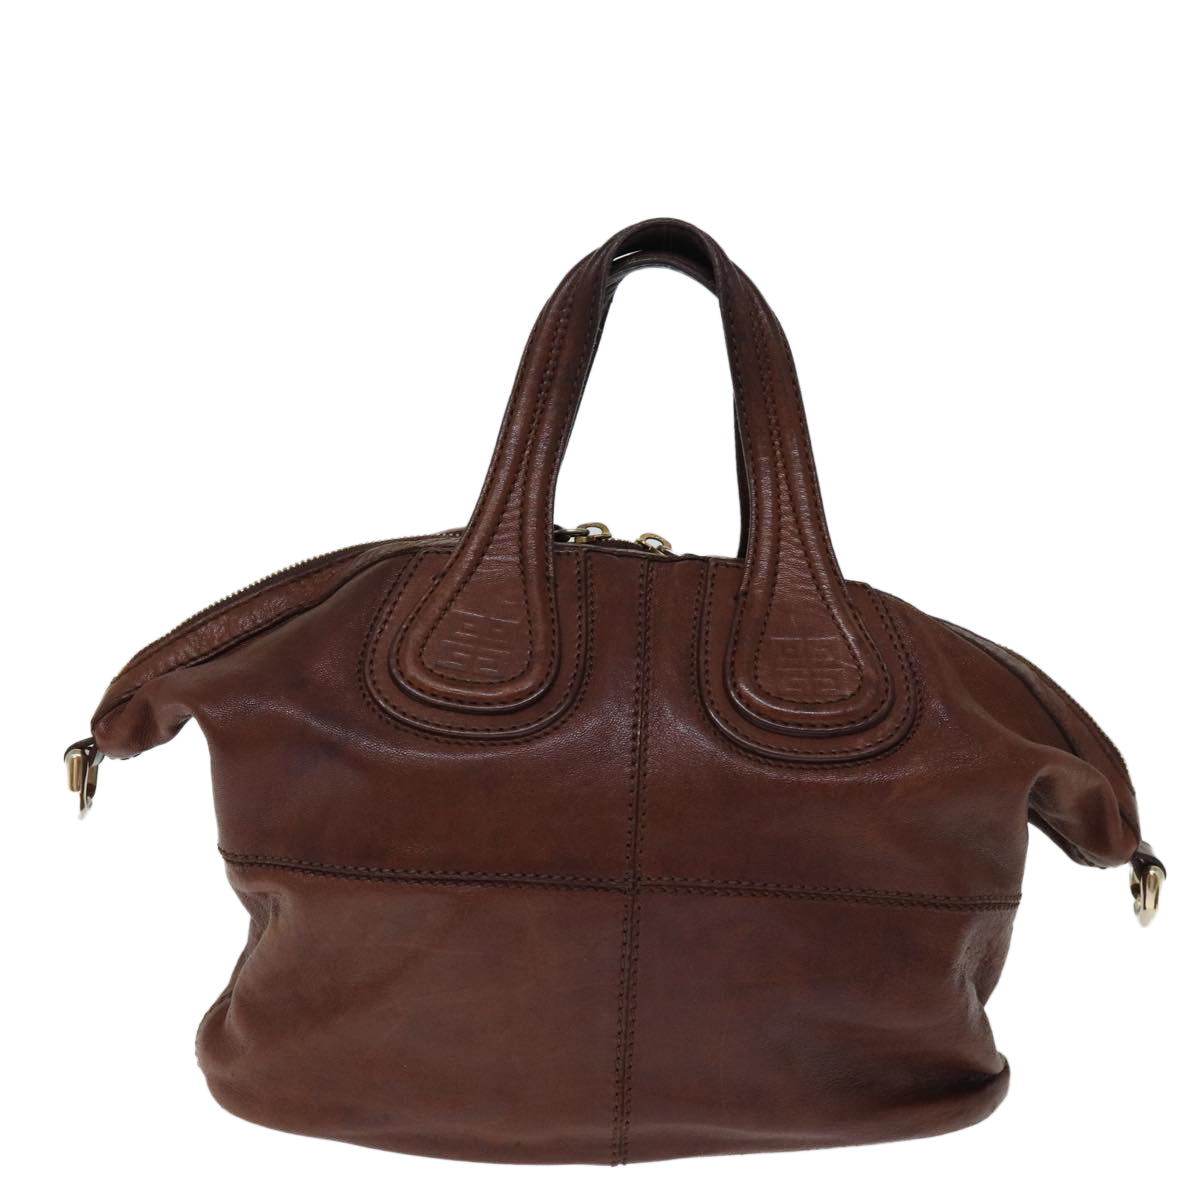 GIVENCHY Nightingale Hand Bag Leather 2way Brown Auth bs14188 - 0